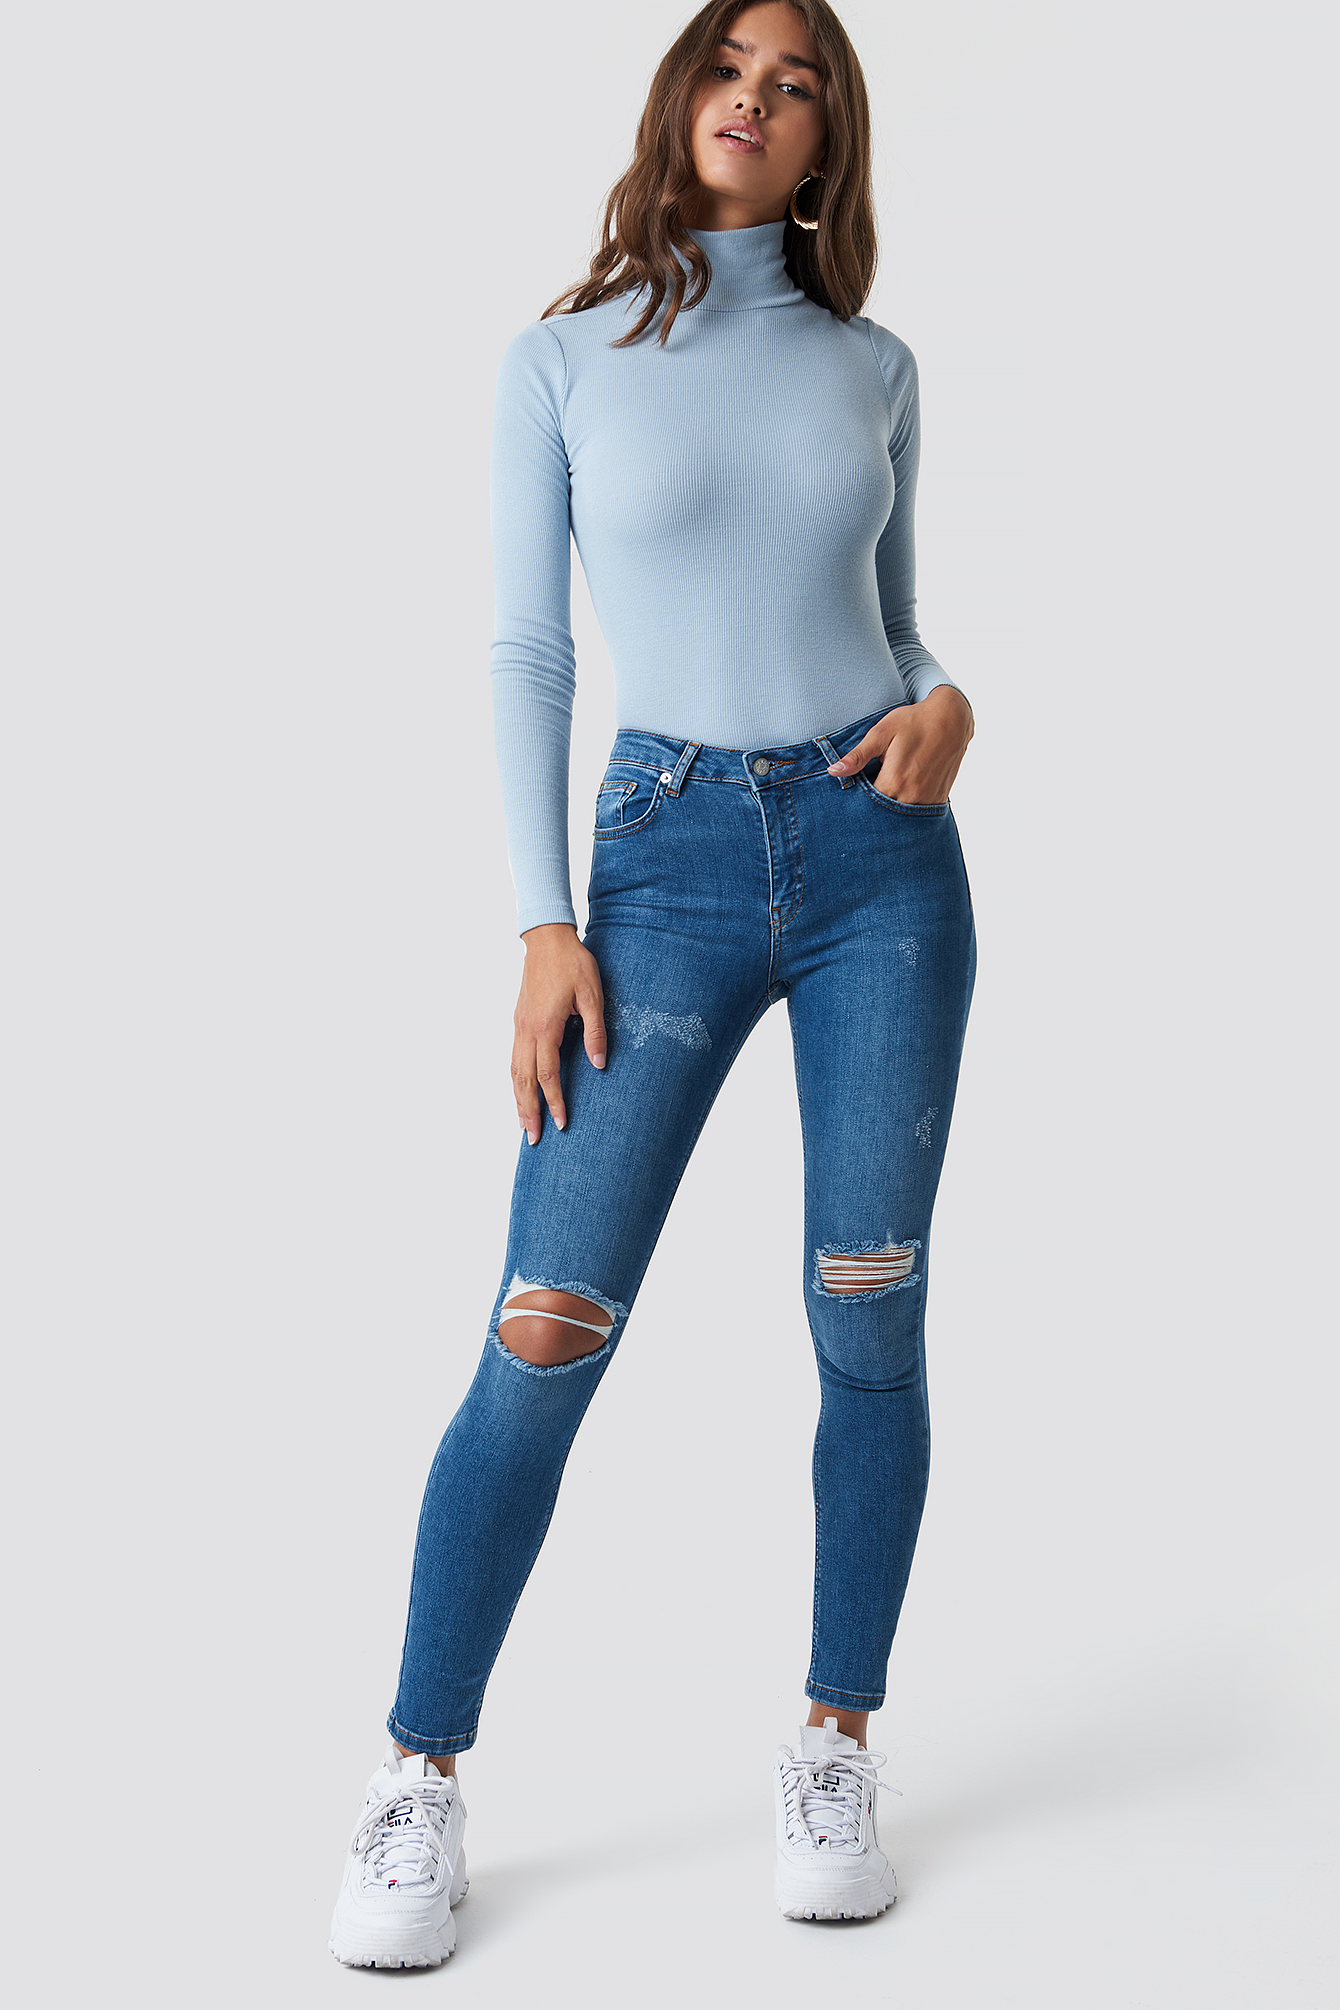 jeans for petite women